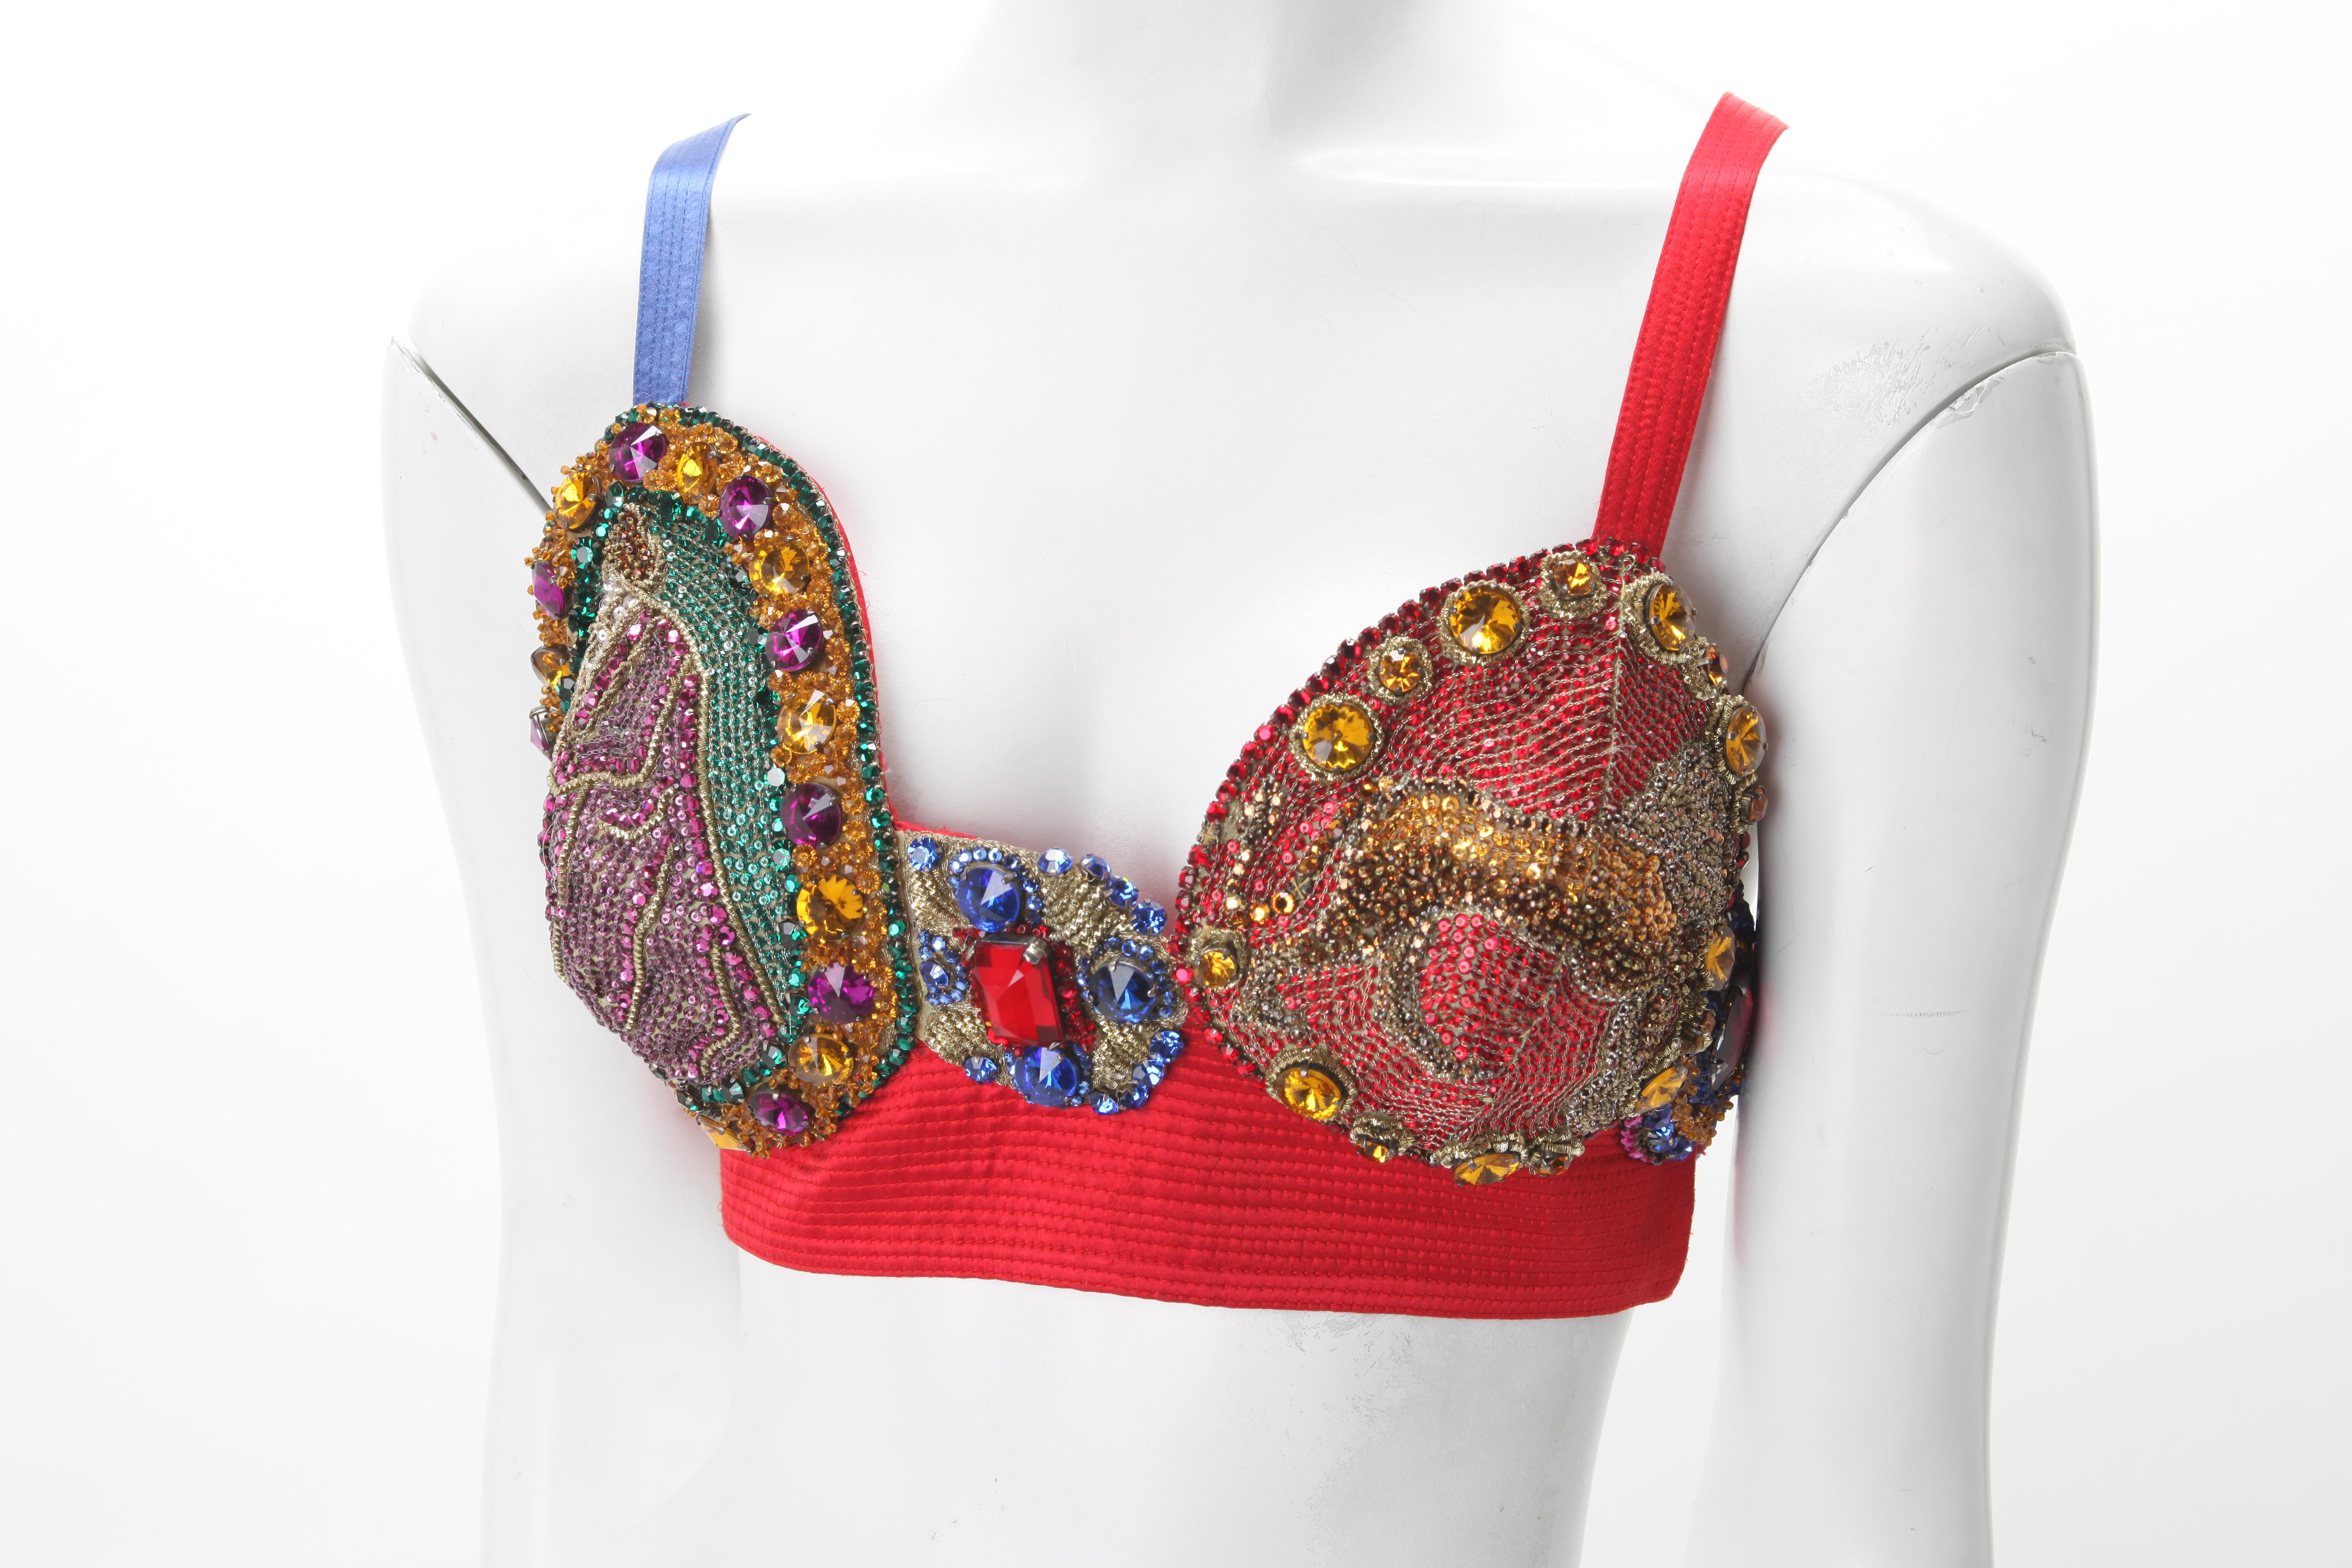 Rare 1991 Gianni Versace Couture Embroidered Bustier with Figural Motifs. Asymmetrica; Red ribbed silk bustier with densely embroidered multi faceted Stones; Color Blocked straps; Hook and closure at side. 